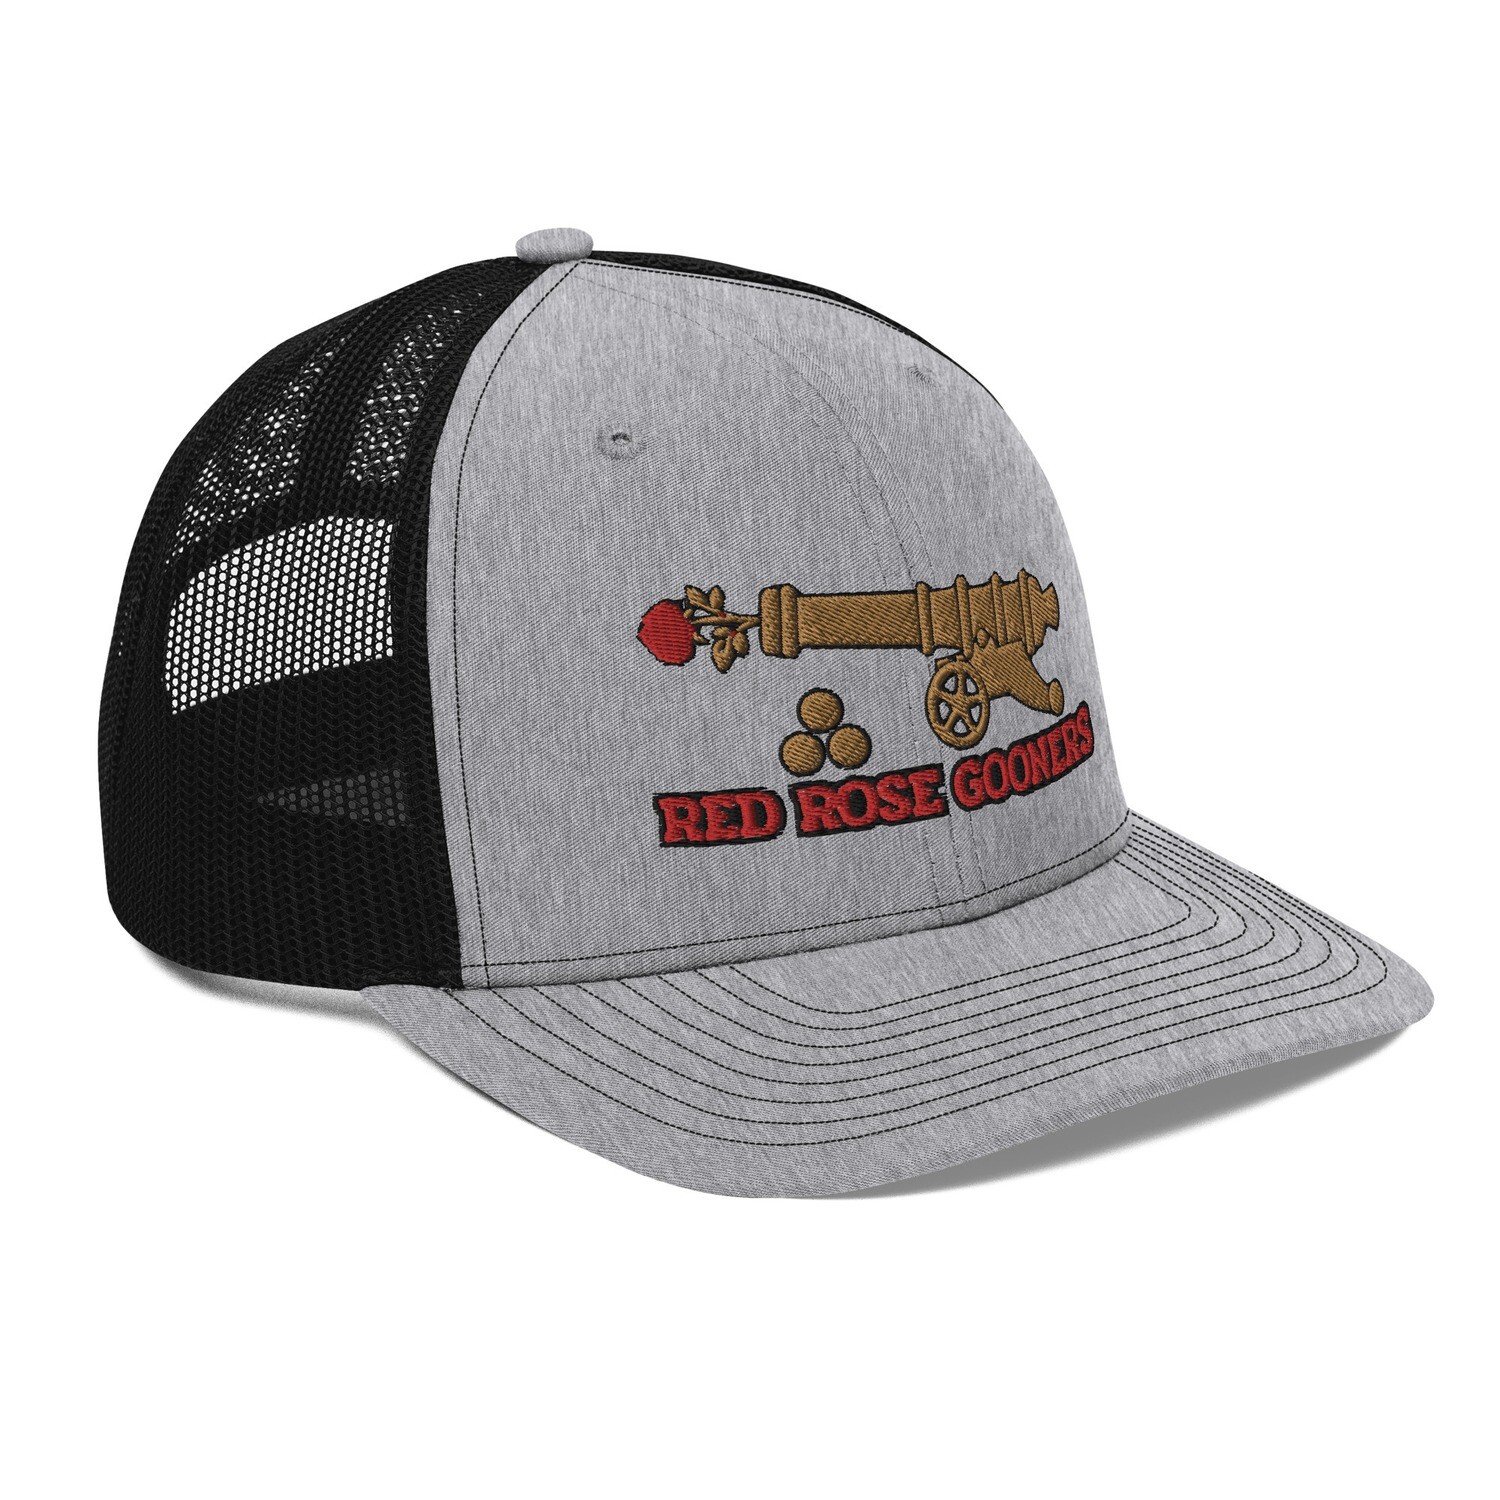 Red Rose Gooners Embroidered Trucker Cap Grey/Black